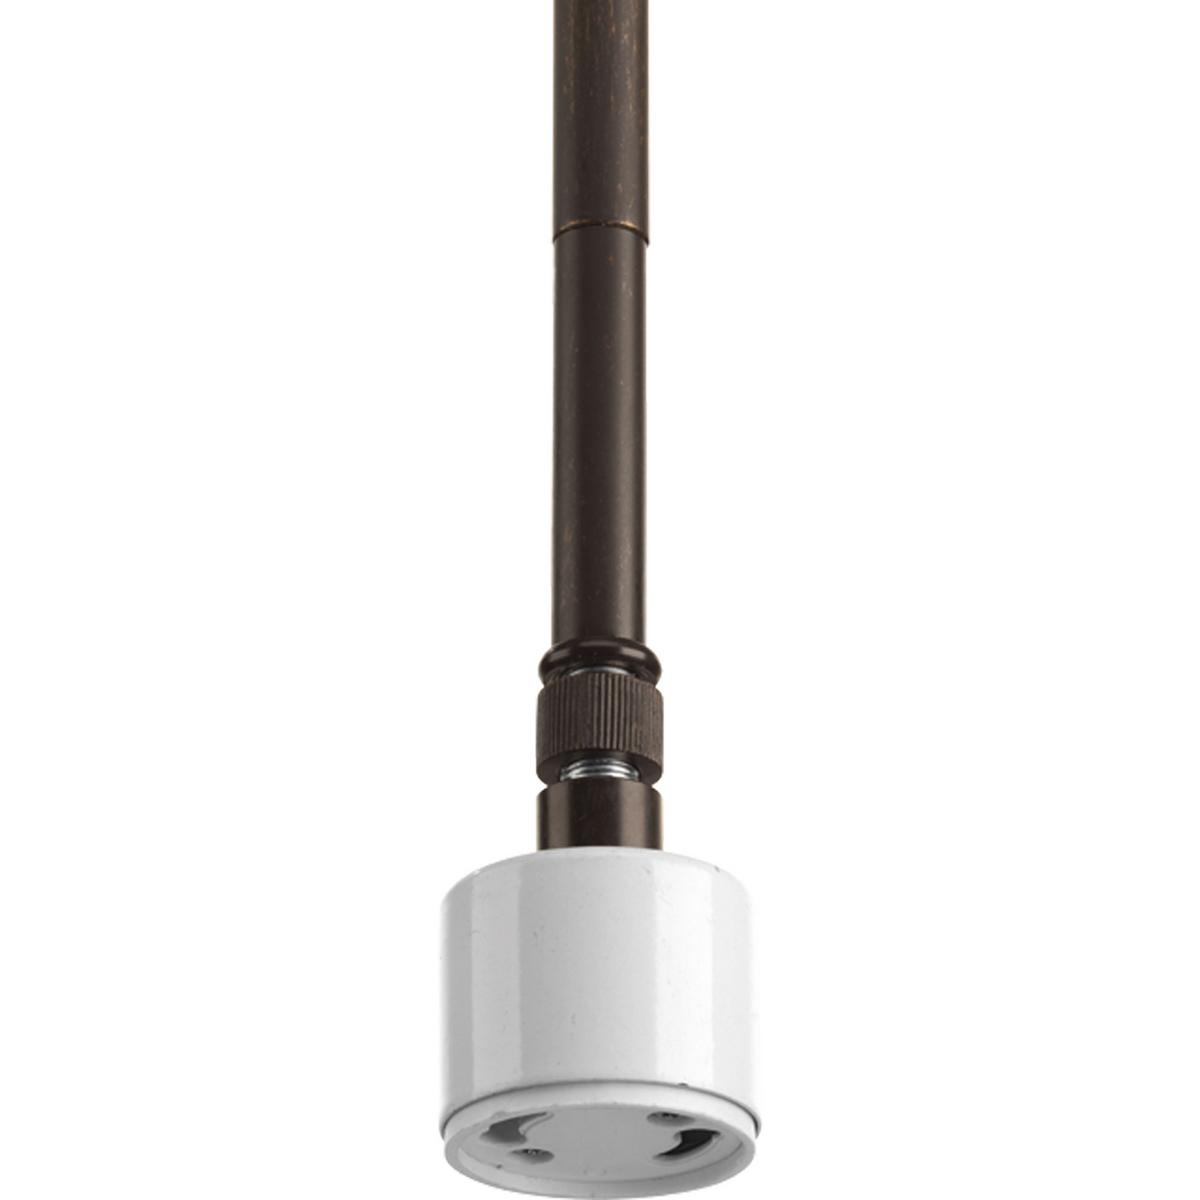 Hubbell P5101-20 The Markor Series is a modular pendant system. The versatile series allow the choice of shades and stem kits. This one-light CFL stem mounted pendant for use with Markor Shades. Shades sold separately. This stem may be used with all Markor shades 9"-22" s